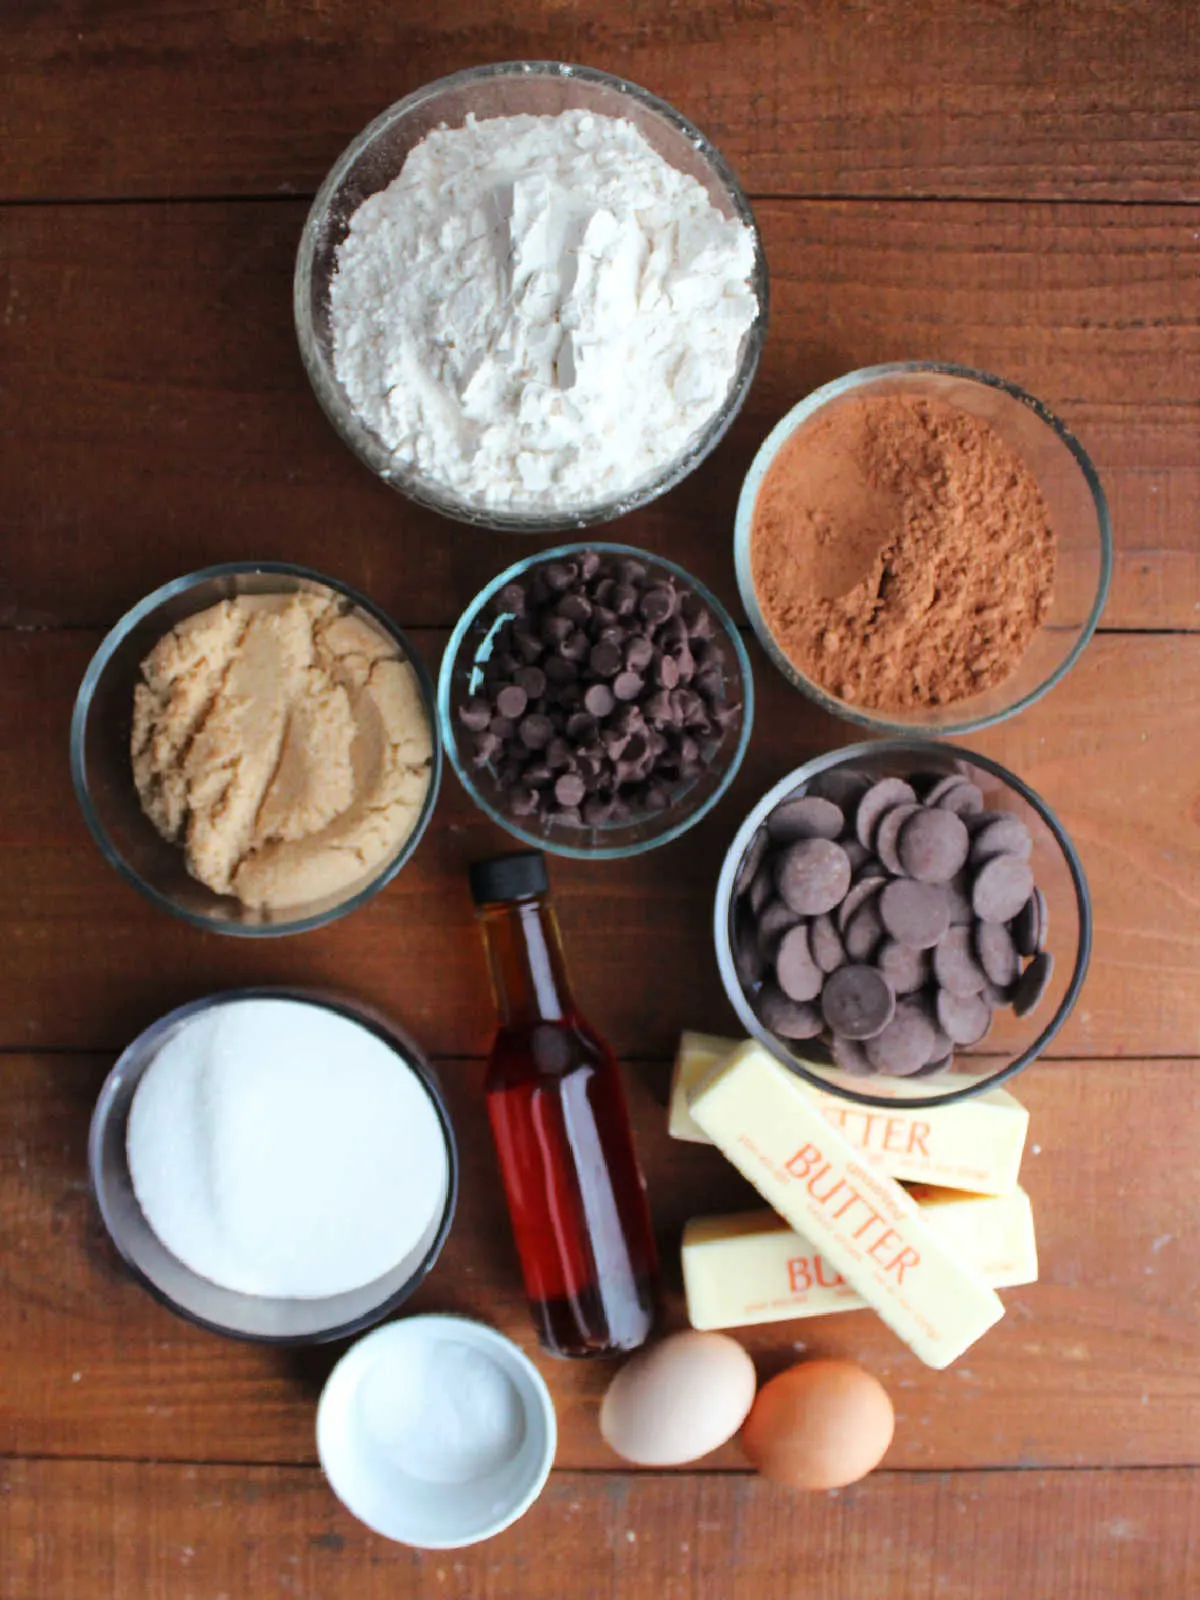 Ingredients including butter, sugar, brown sugar, eggs, vanilla, flour, cocoa powder, salt, baking soda, chocolate chips, and chocolate melting wafers ready to be made into chocolate paw print cookies.